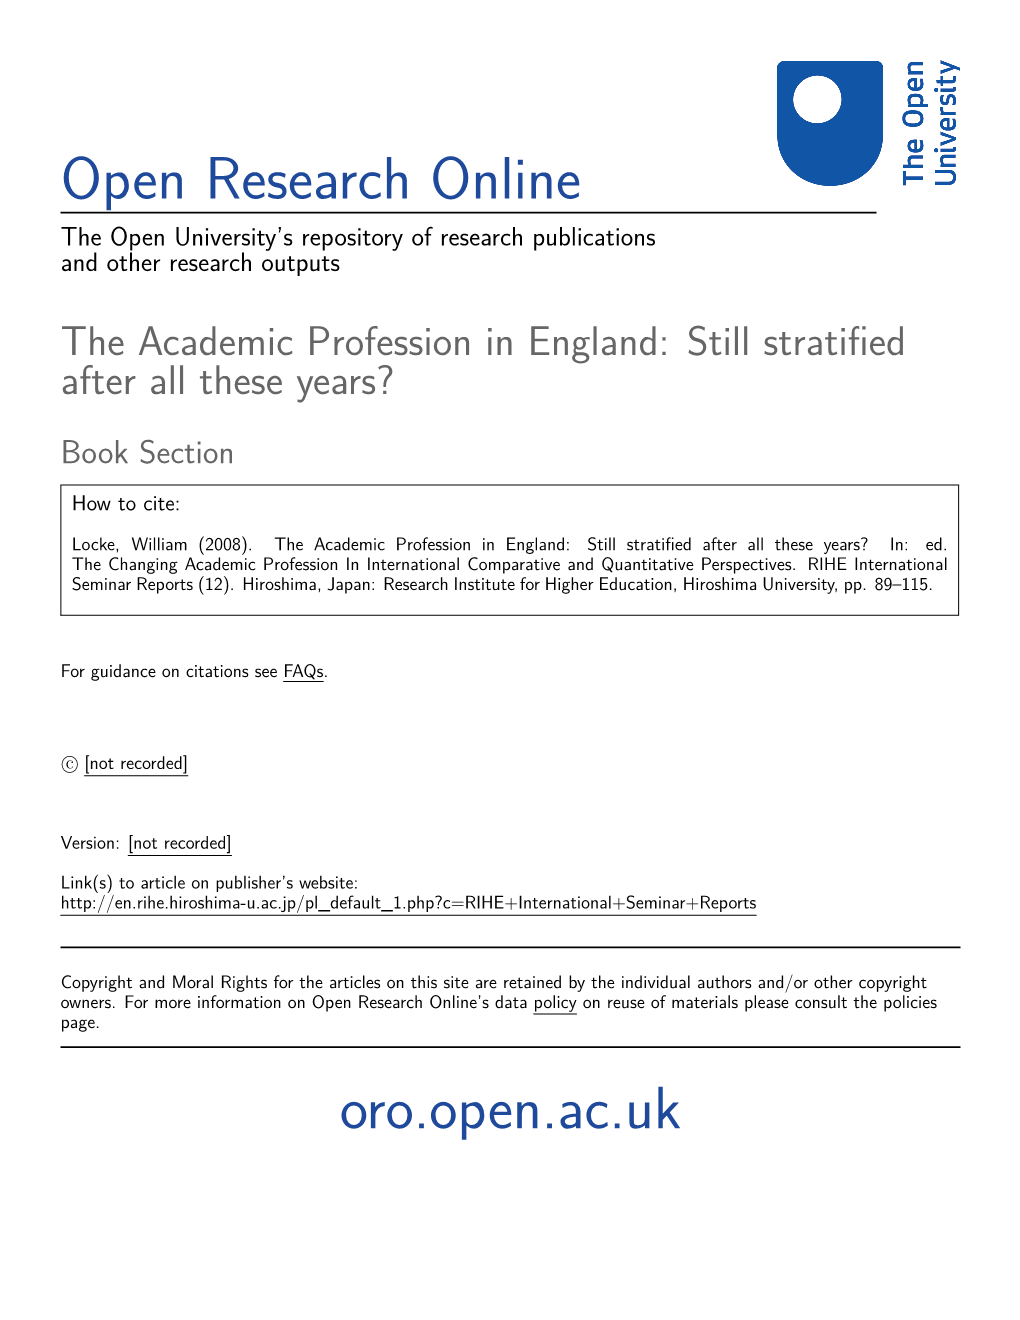 The Academic Profession in England: Still Stratiﬁed After All These Years?